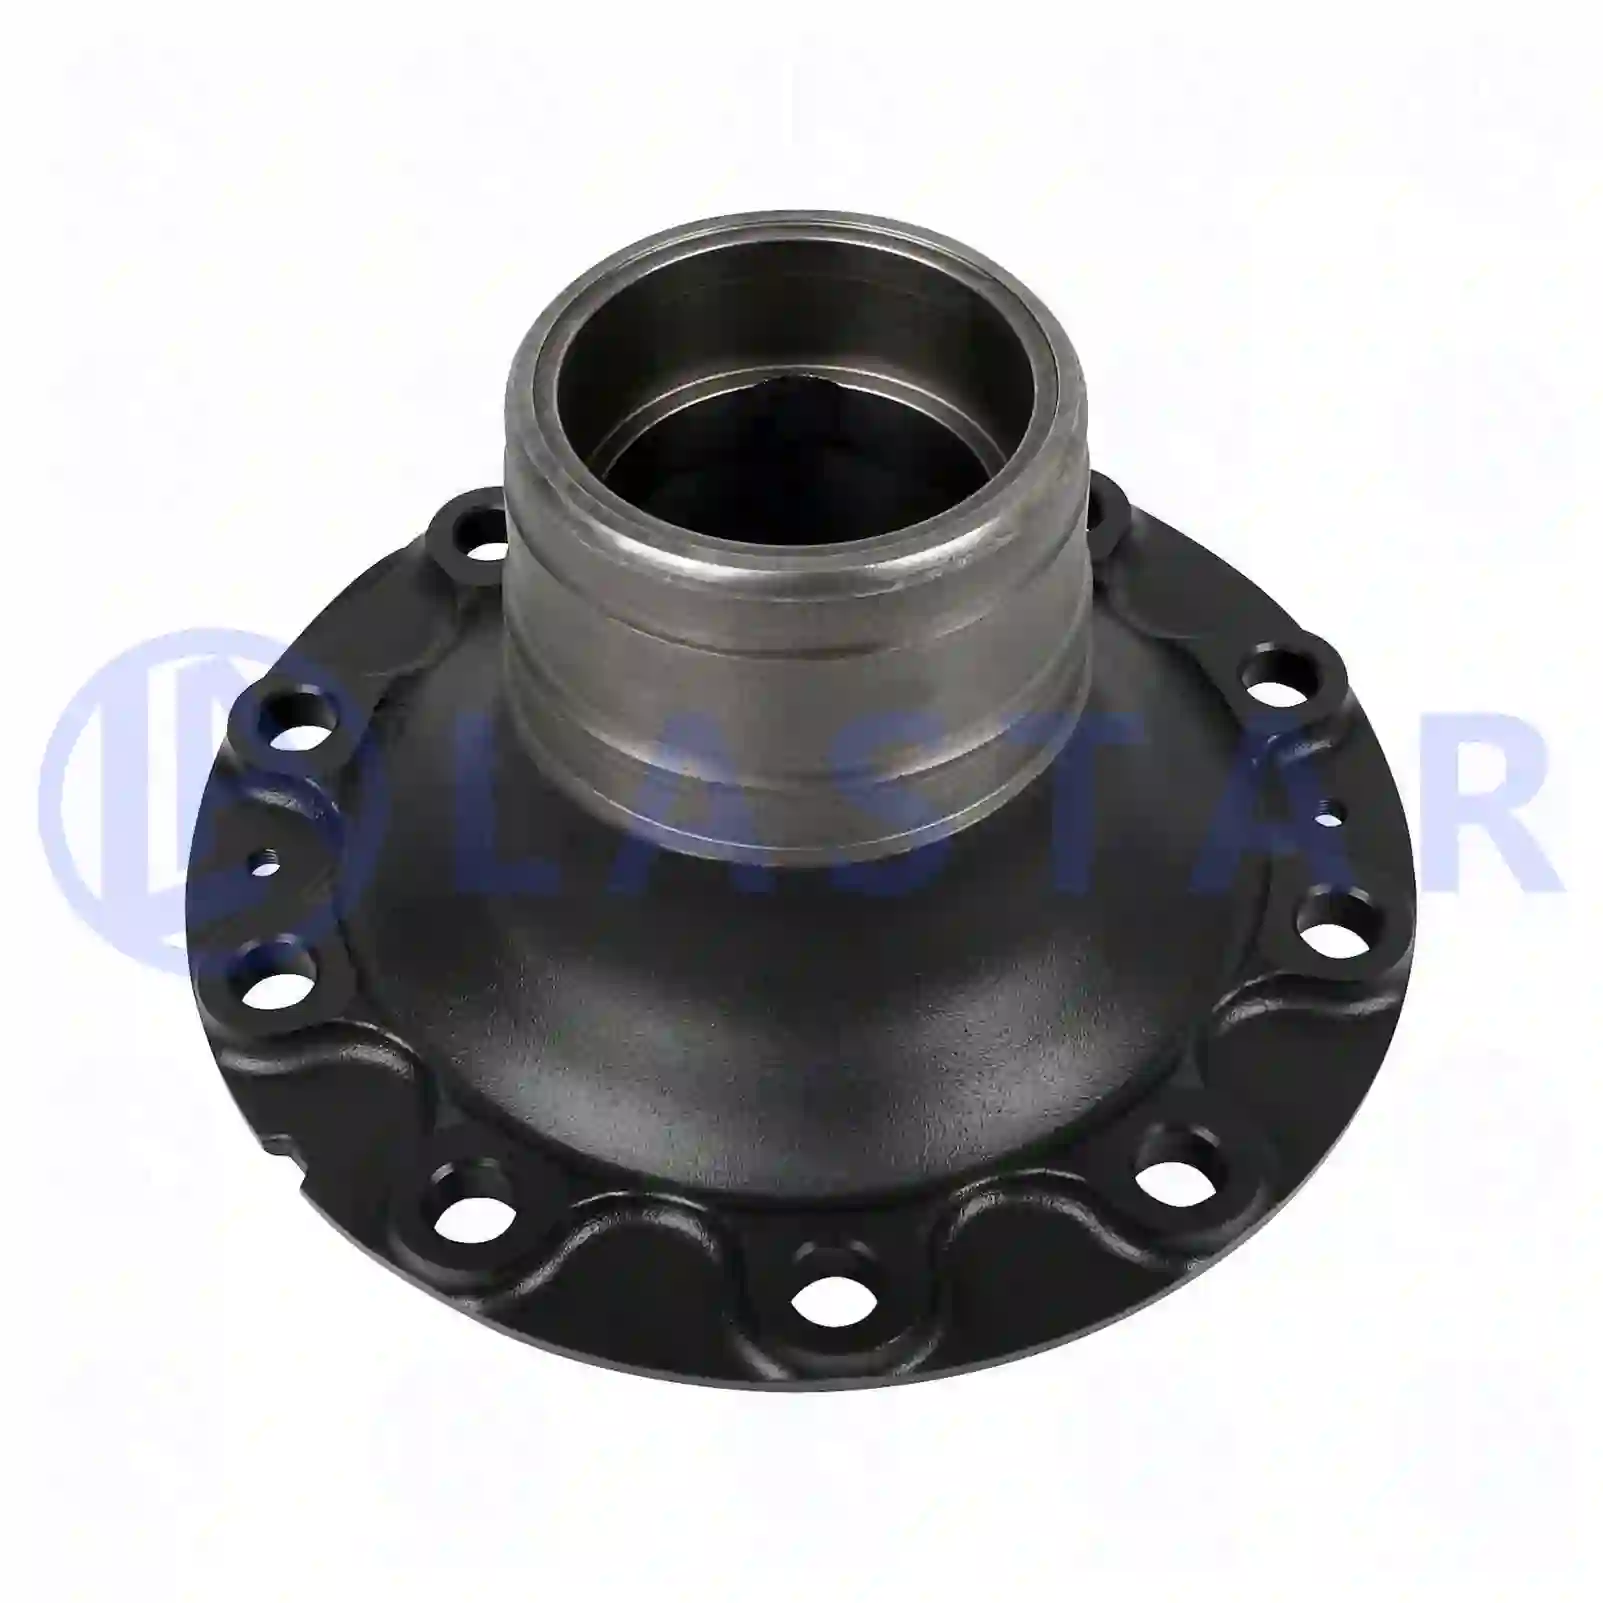 Wheel hub, with bearing, 77726601, 7420534904S, 7421024160S, 20534904S, 20581399S, 21024160S, 21024166S, ||  77726601 Lastar Spare Part | Truck Spare Parts, Auotomotive Spare Parts Wheel hub, with bearing, 77726601, 7420534904S, 7421024160S, 20534904S, 20581399S, 21024160S, 21024166S, ||  77726601 Lastar Spare Part | Truck Spare Parts, Auotomotive Spare Parts